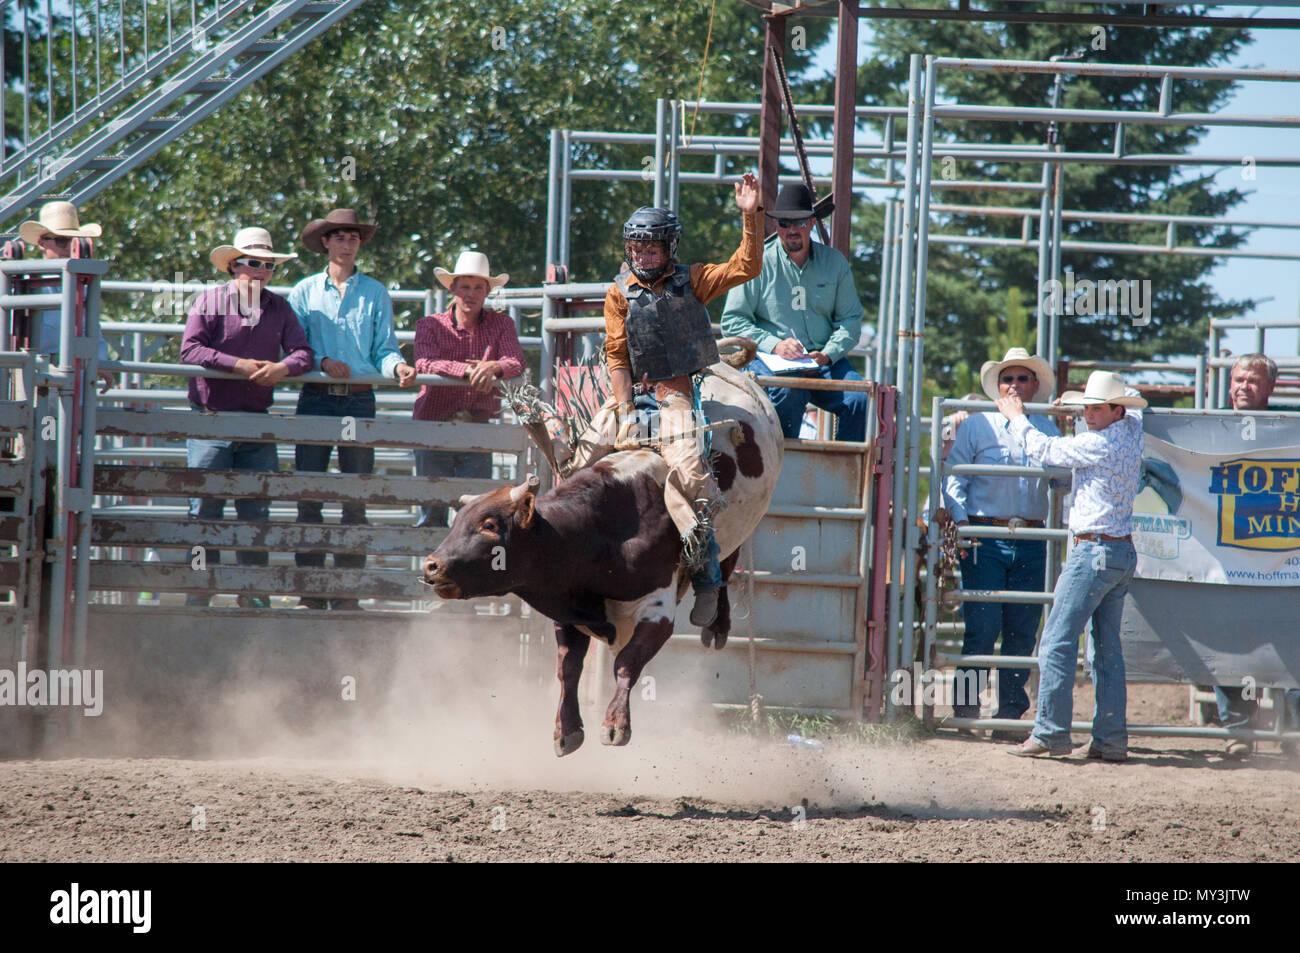 Bull rider in an amateur bull riding competition